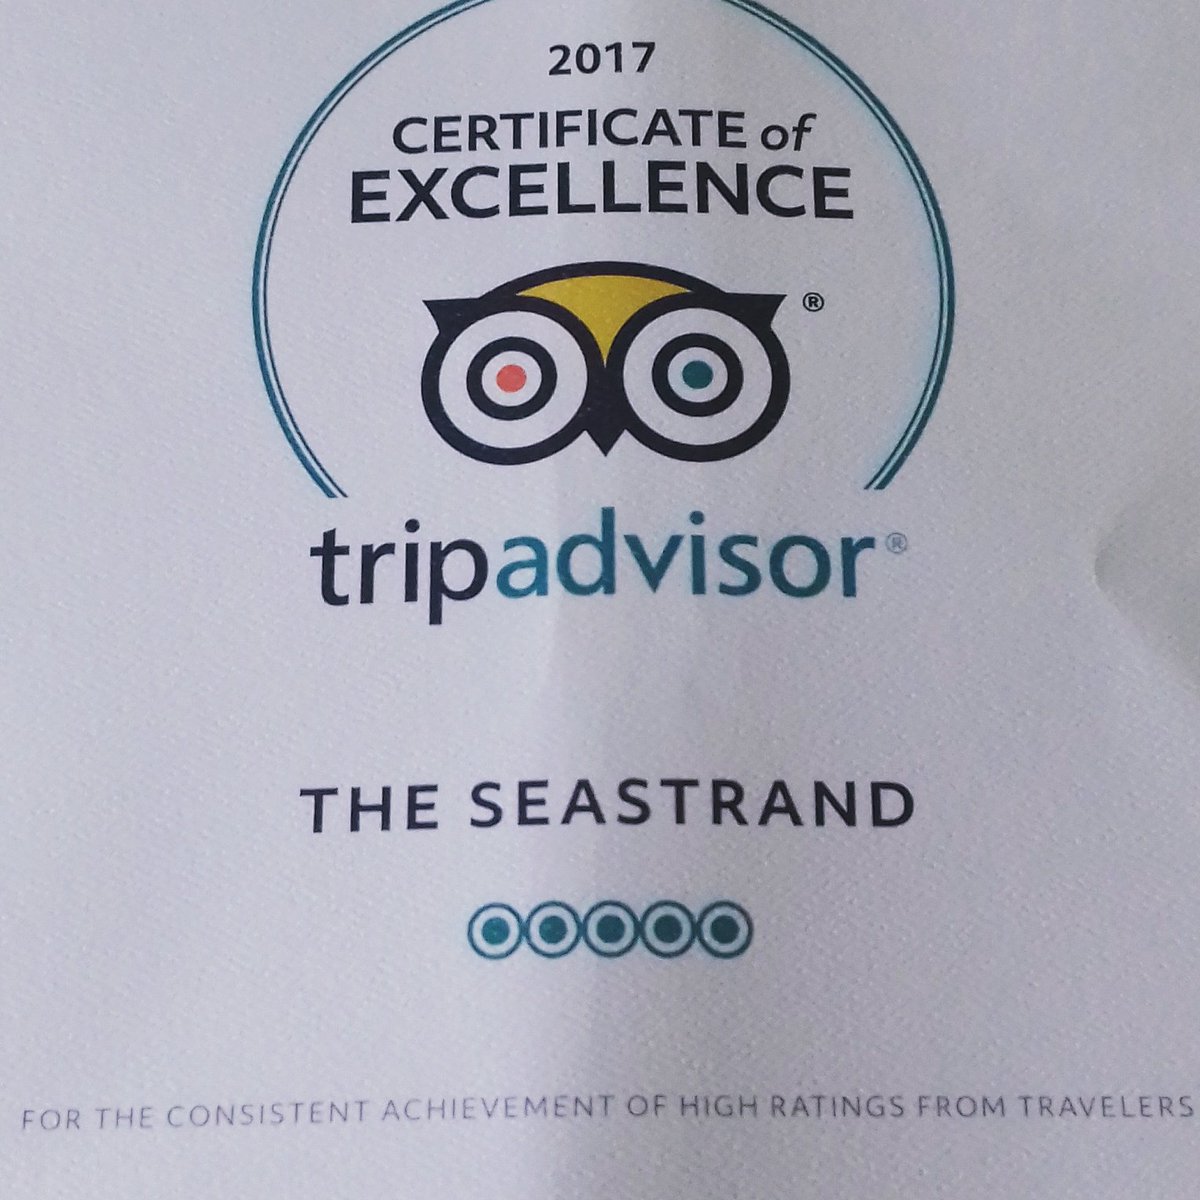 How lovely! Look what came in the post today #tripadvisor #certificateofexcellence #scarborough #coffeekiosk #independantcoffeeshop #local